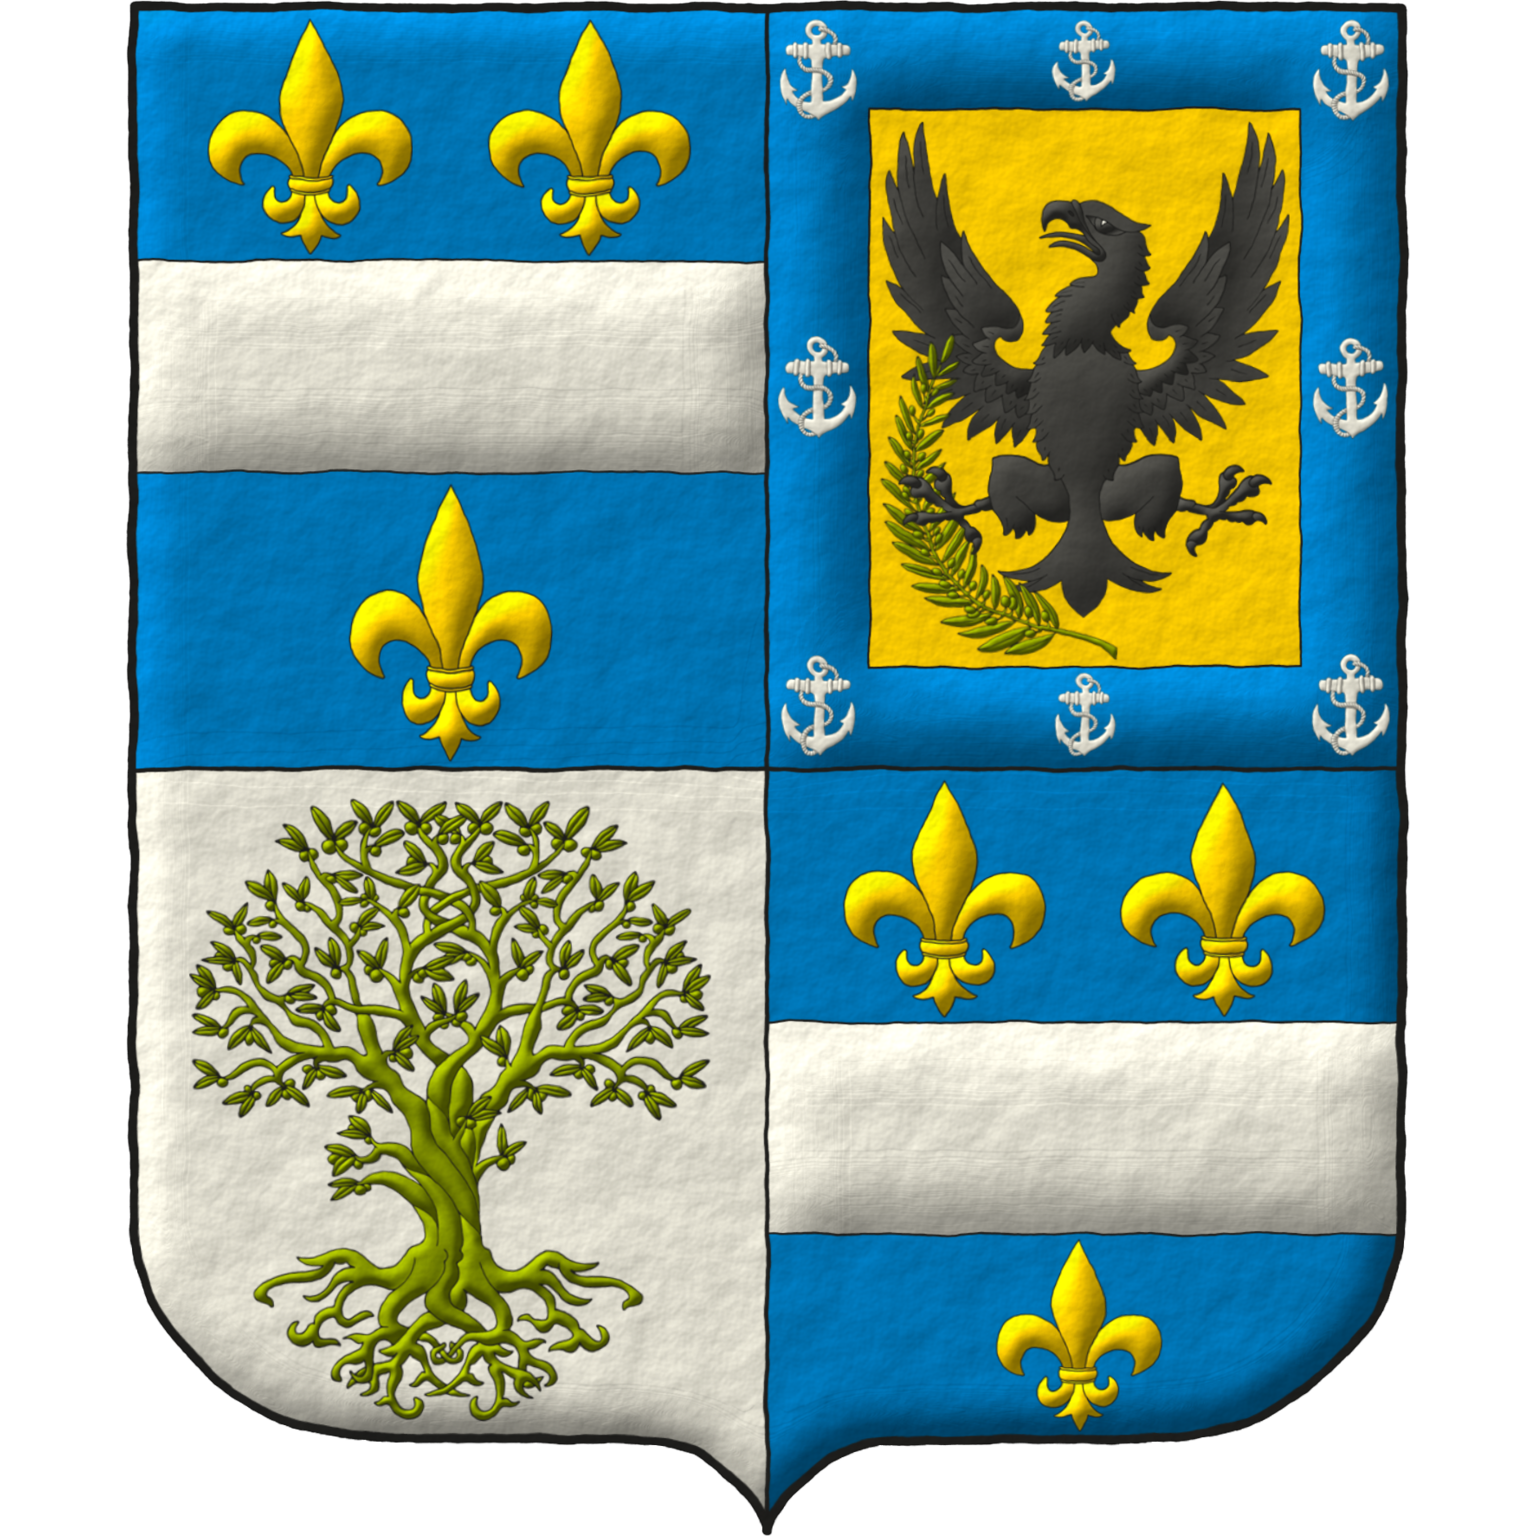 Quarterly: 1 and 4 Azure, a fess Argent between three fleurs de lis Or; 2 Or, an eagle displayed Sable grasping in its dexter talon an olive branch fructed Vert, all within a bordure Azure charged with eight anchors Argent; 3 Argent, an olive tree fructed Vert.